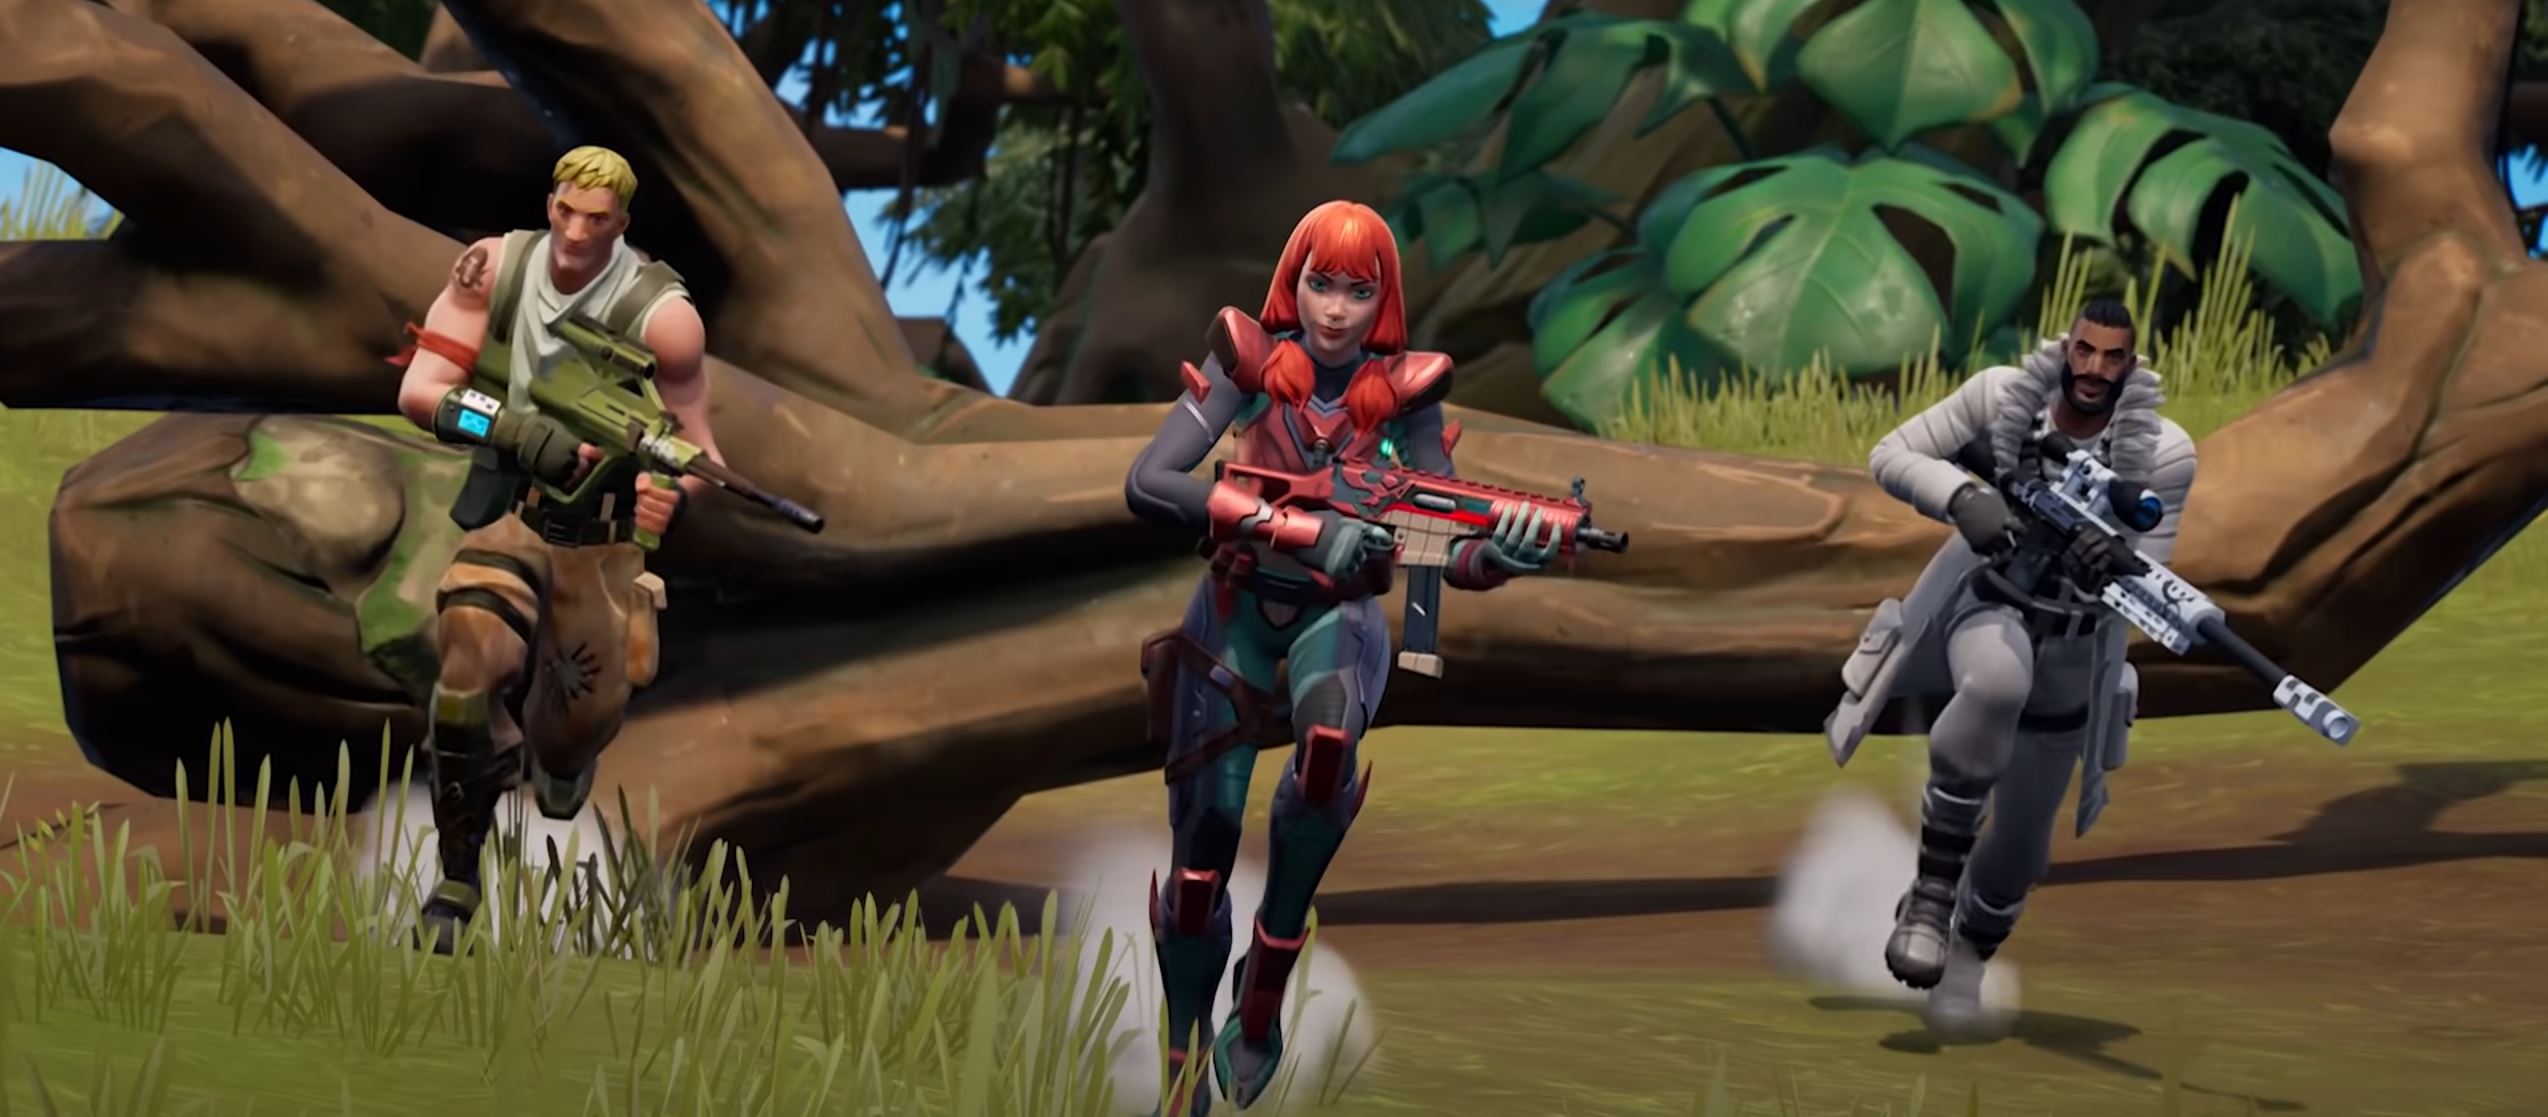 Three Fortnite characters run towards the camera, weapons at the ready, in Epic Games’ trailer for Zero Build mode